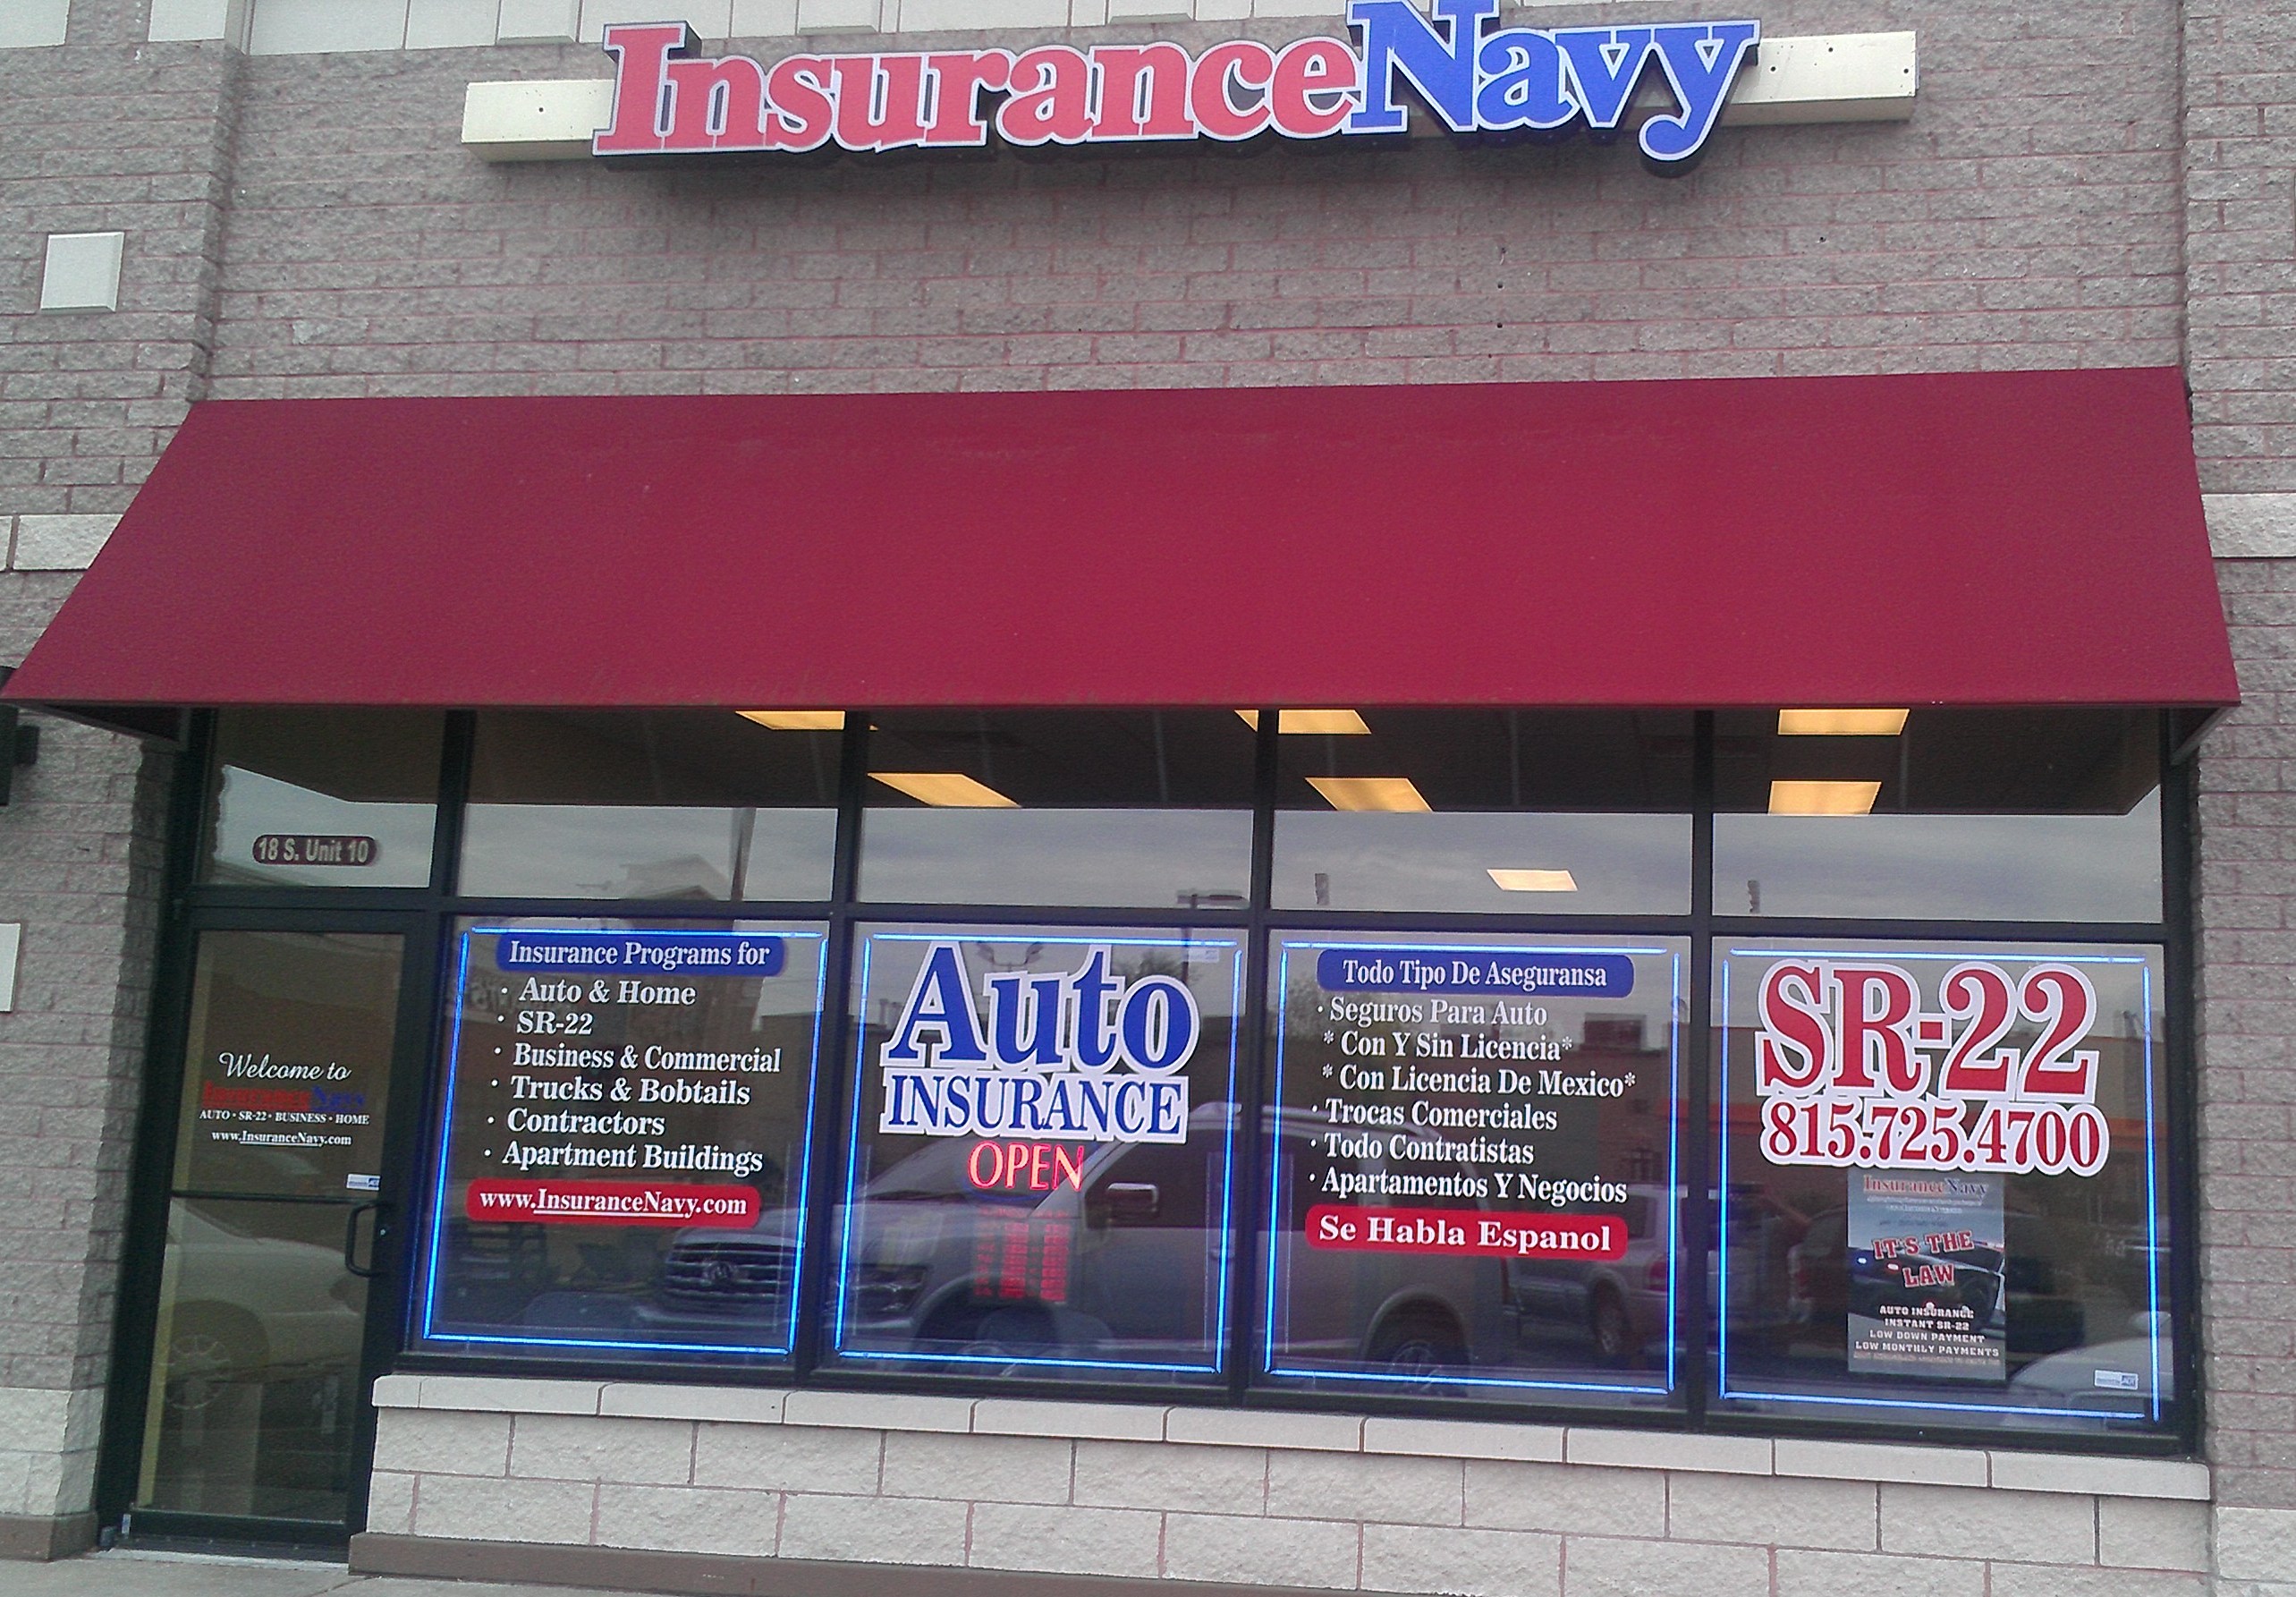 Insurance Navy Alerts its Clients of Recently Discovered Faulty Air ...